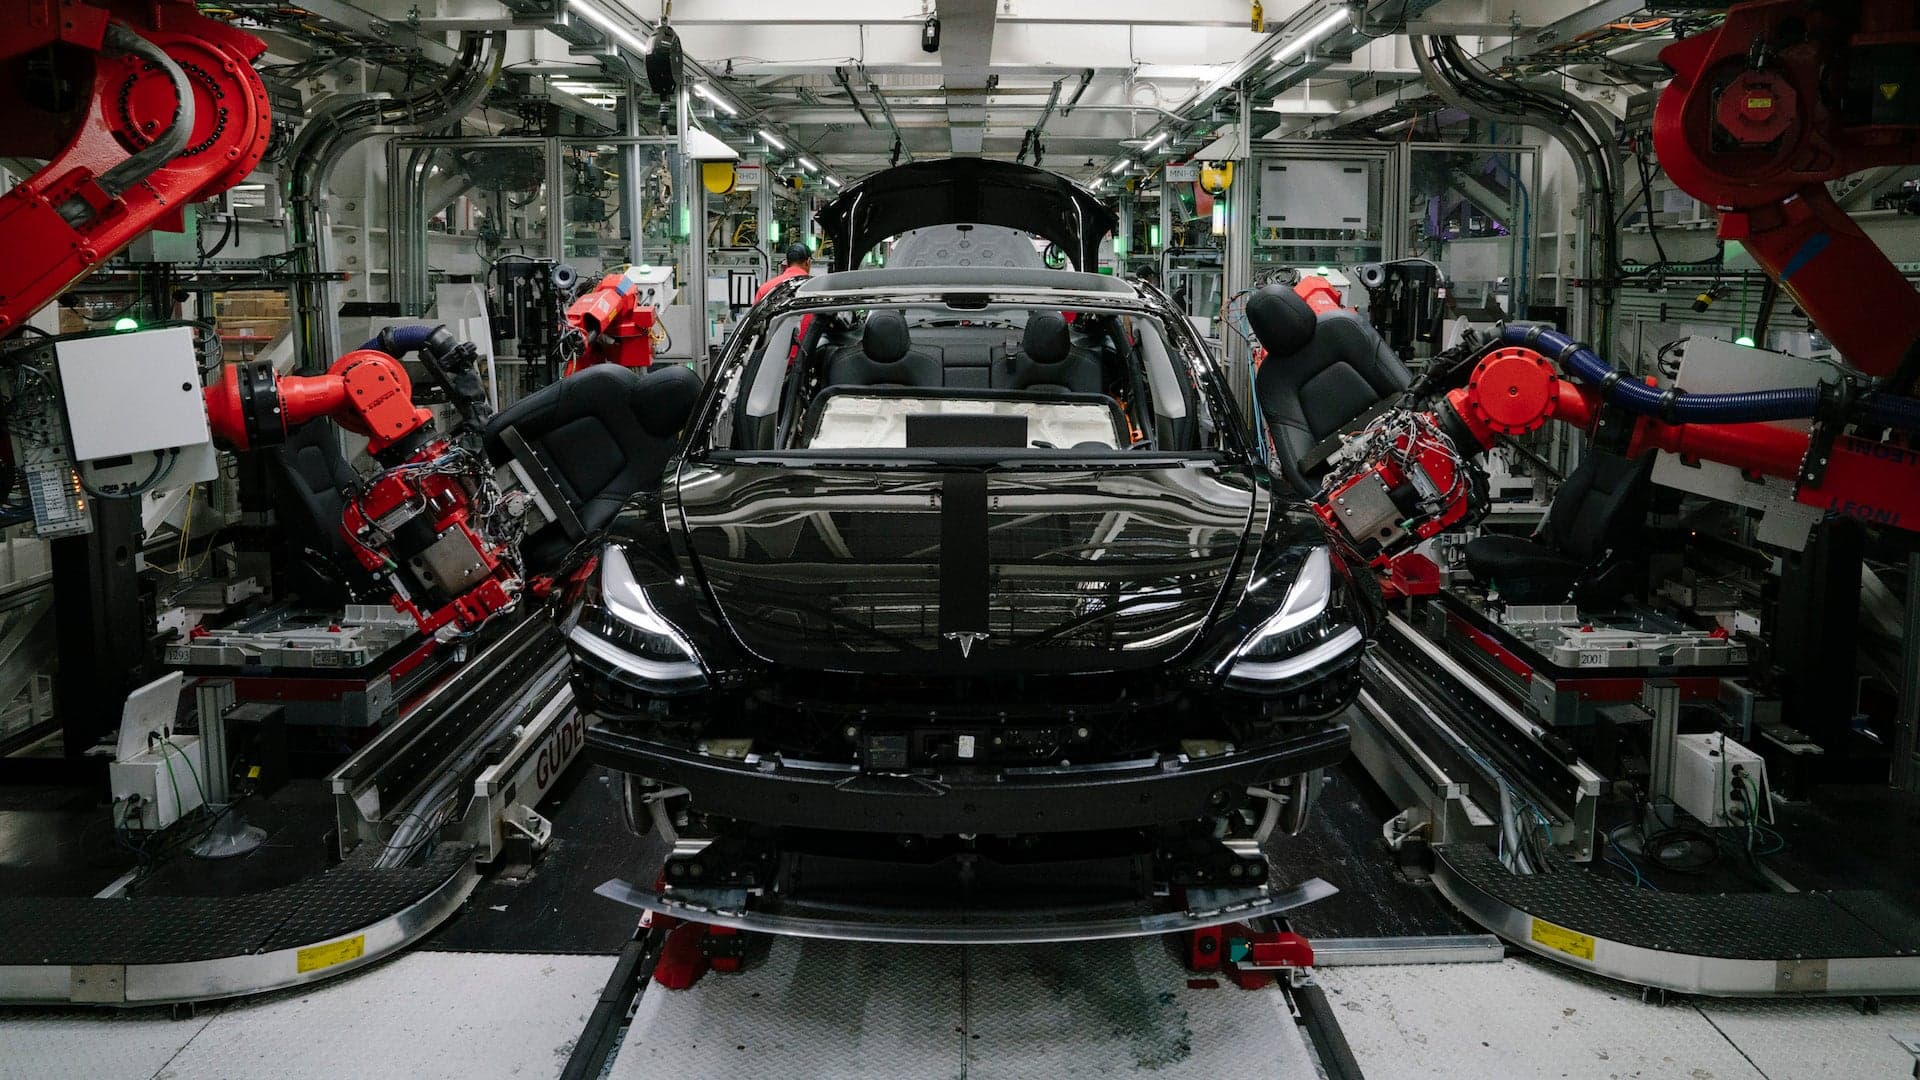 Tesla’s Elon Musk Wants to Double Current Vehicle Production by End of Q3